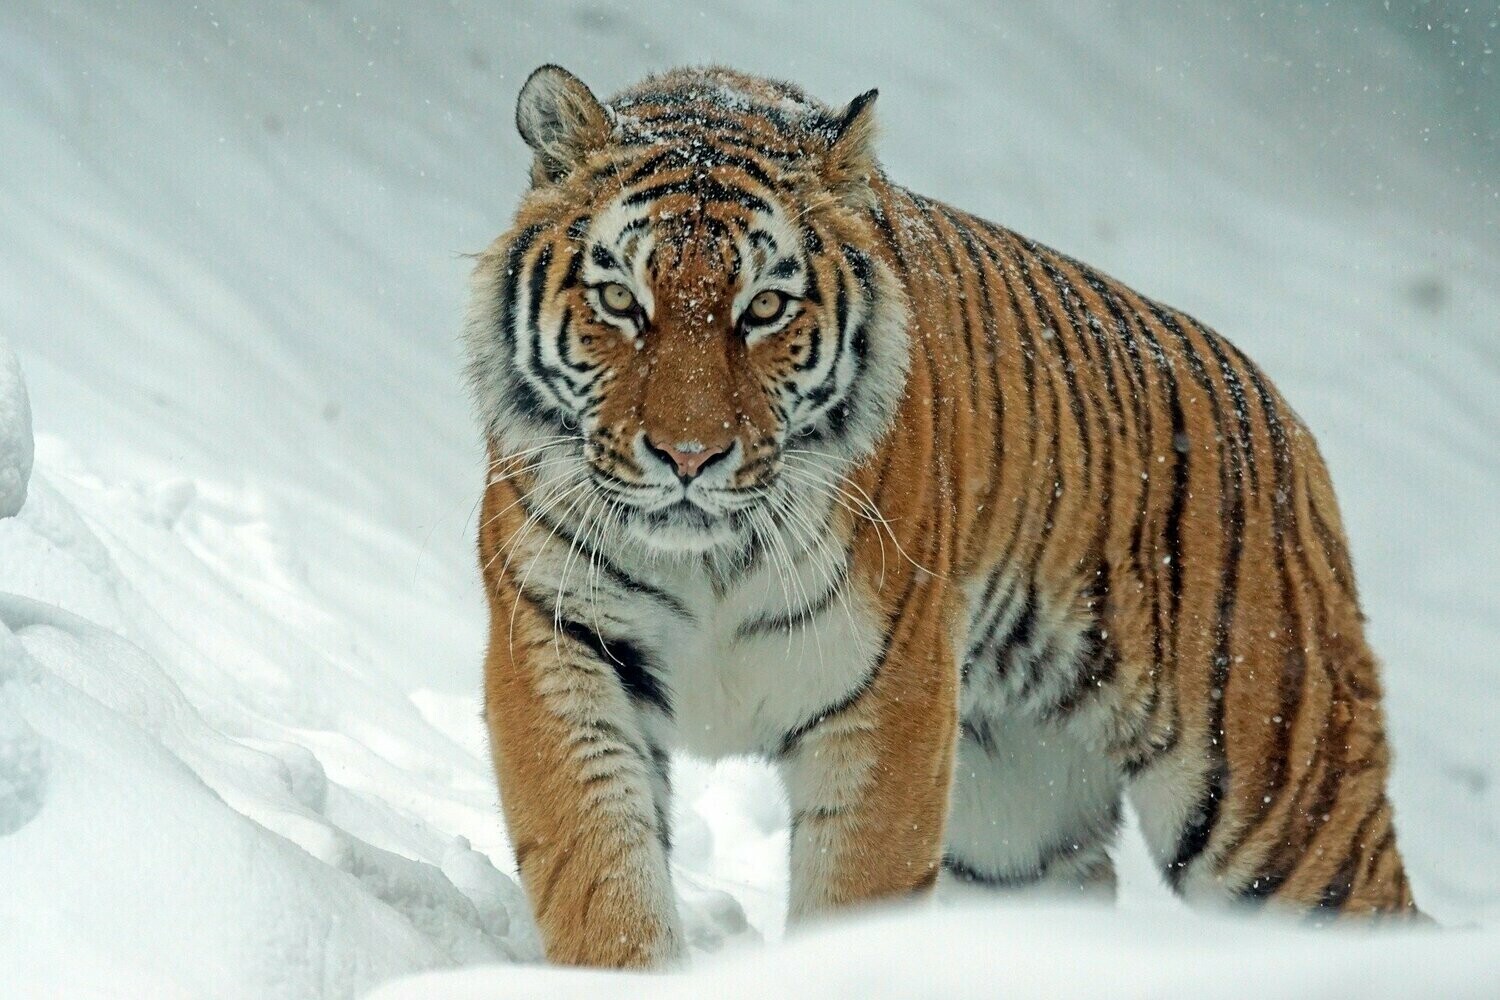 Tiger In The Snow - Specially ordered for you. Delivery is approximately 4 - 6 weeks.